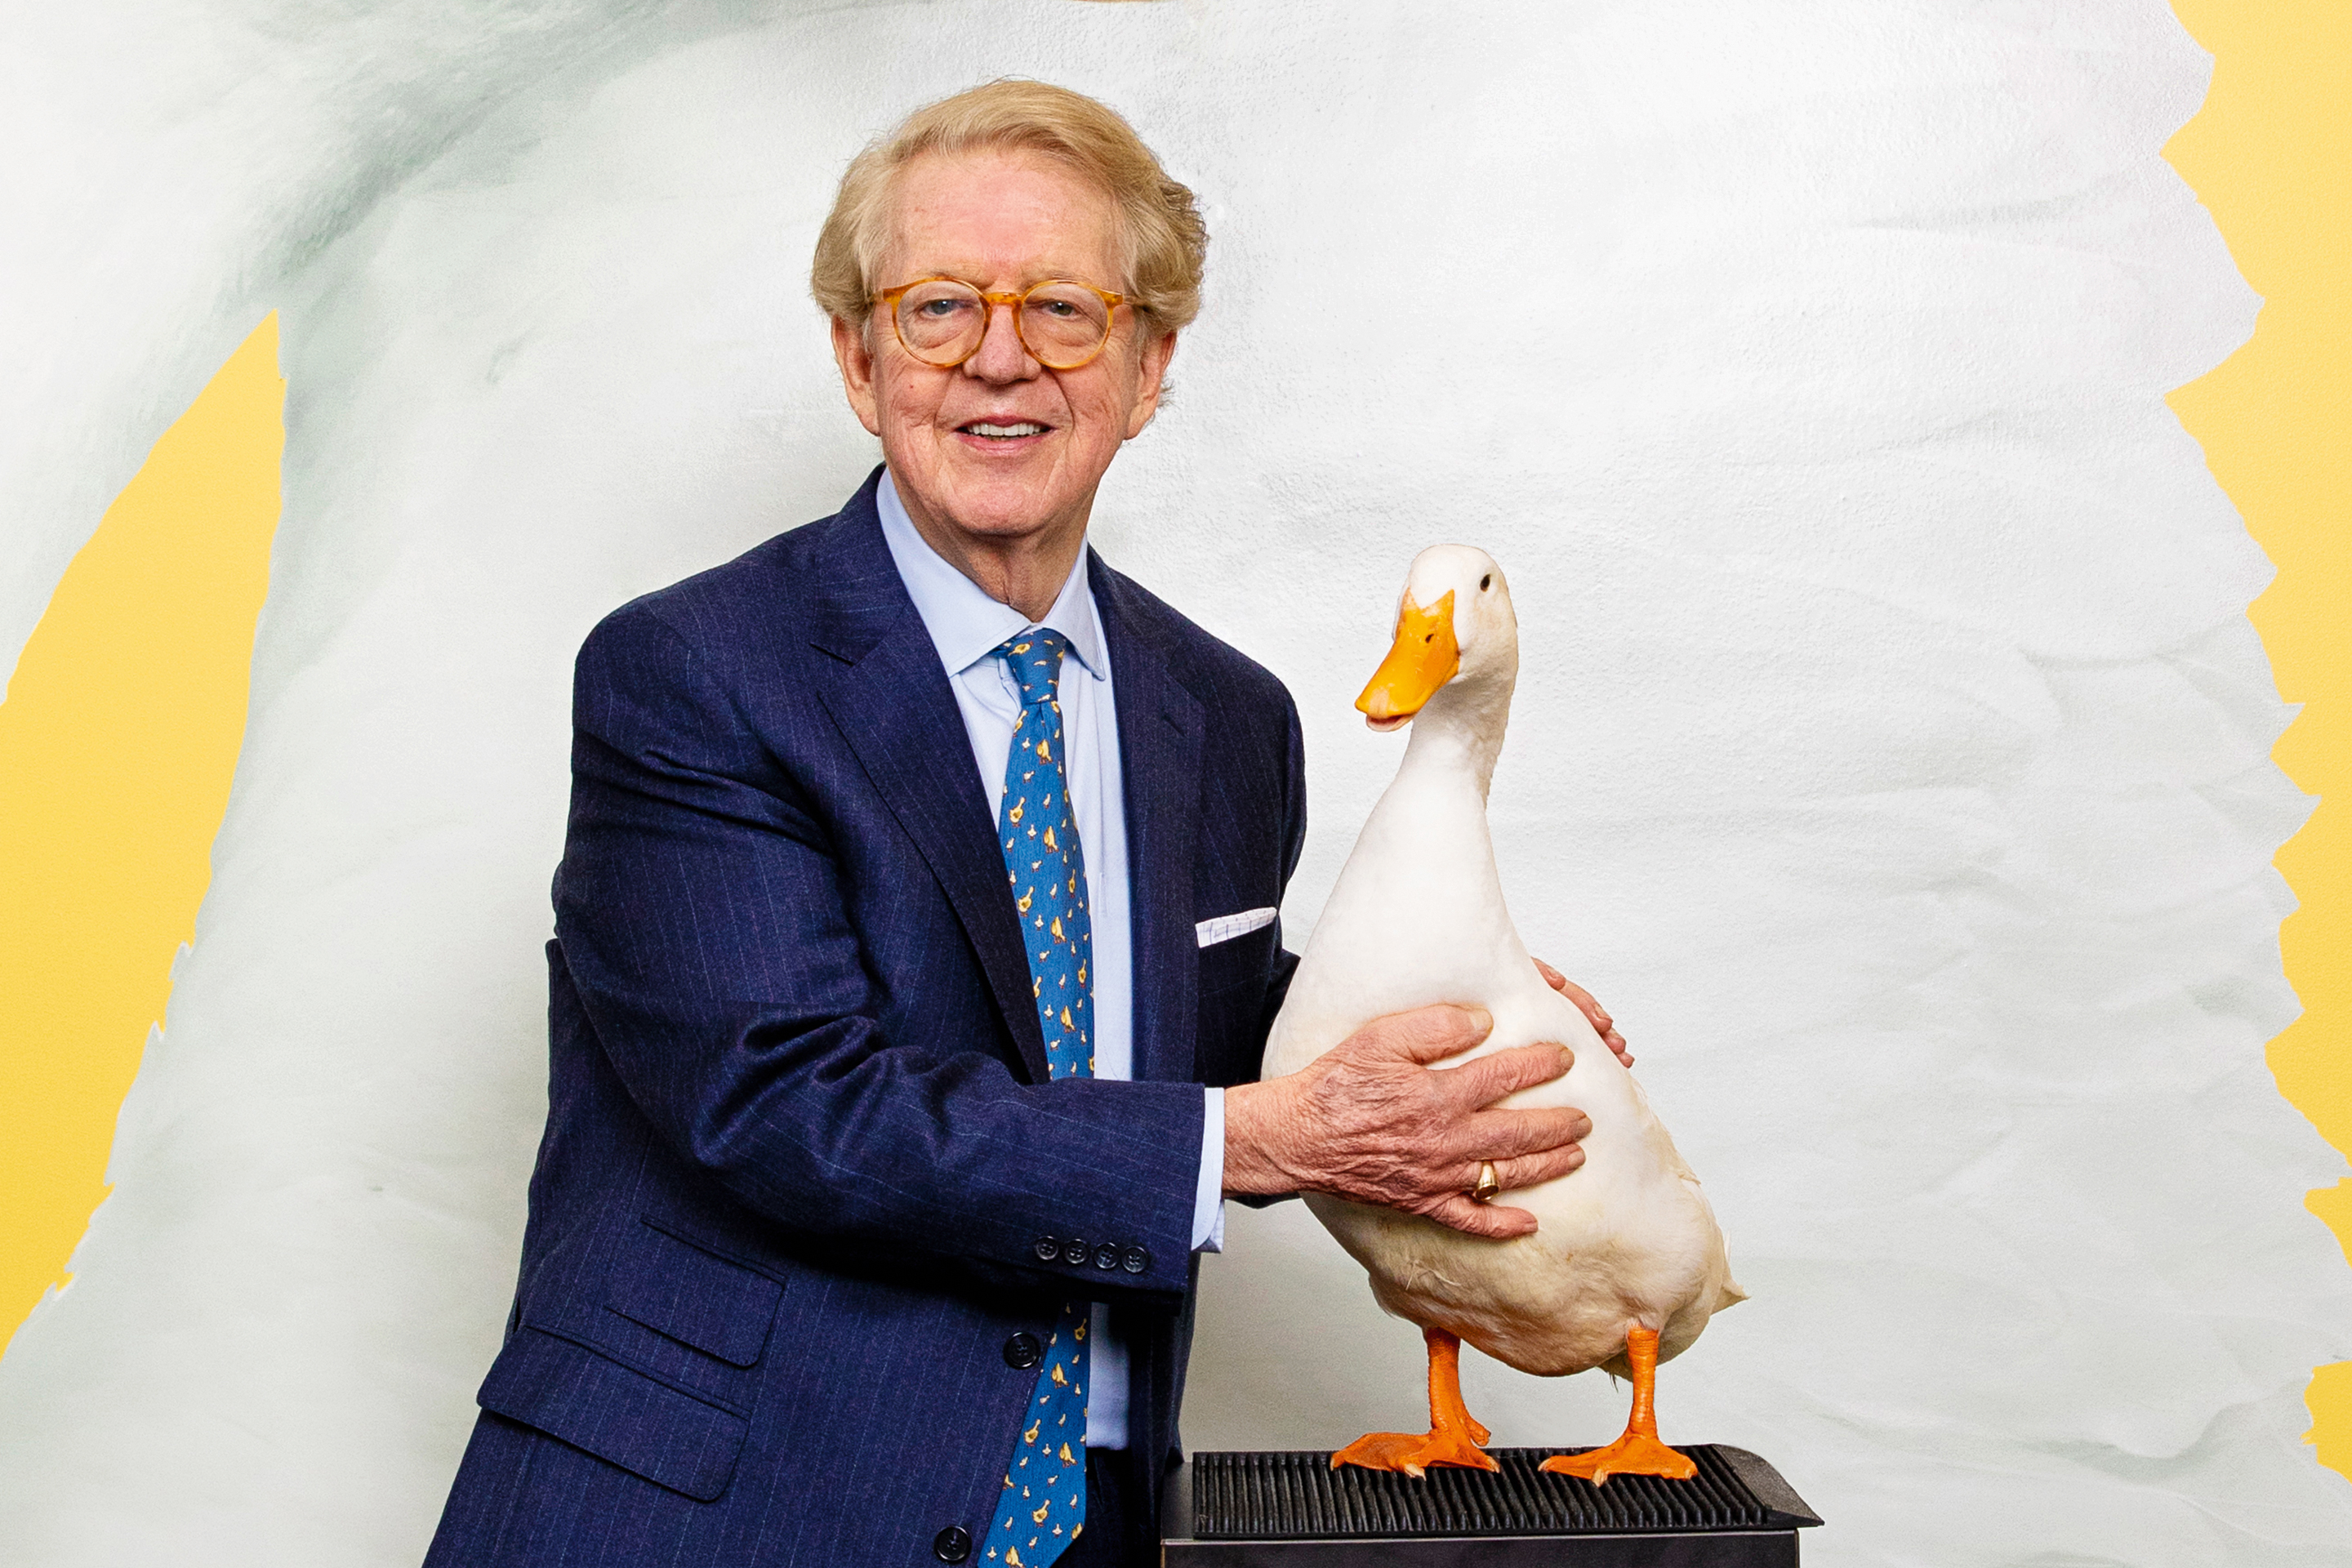 AFLAC CEO and Chairman Dan Amos at the AFLAC headquarters with a duck in Columbus, Georgia on February 16, 2024.